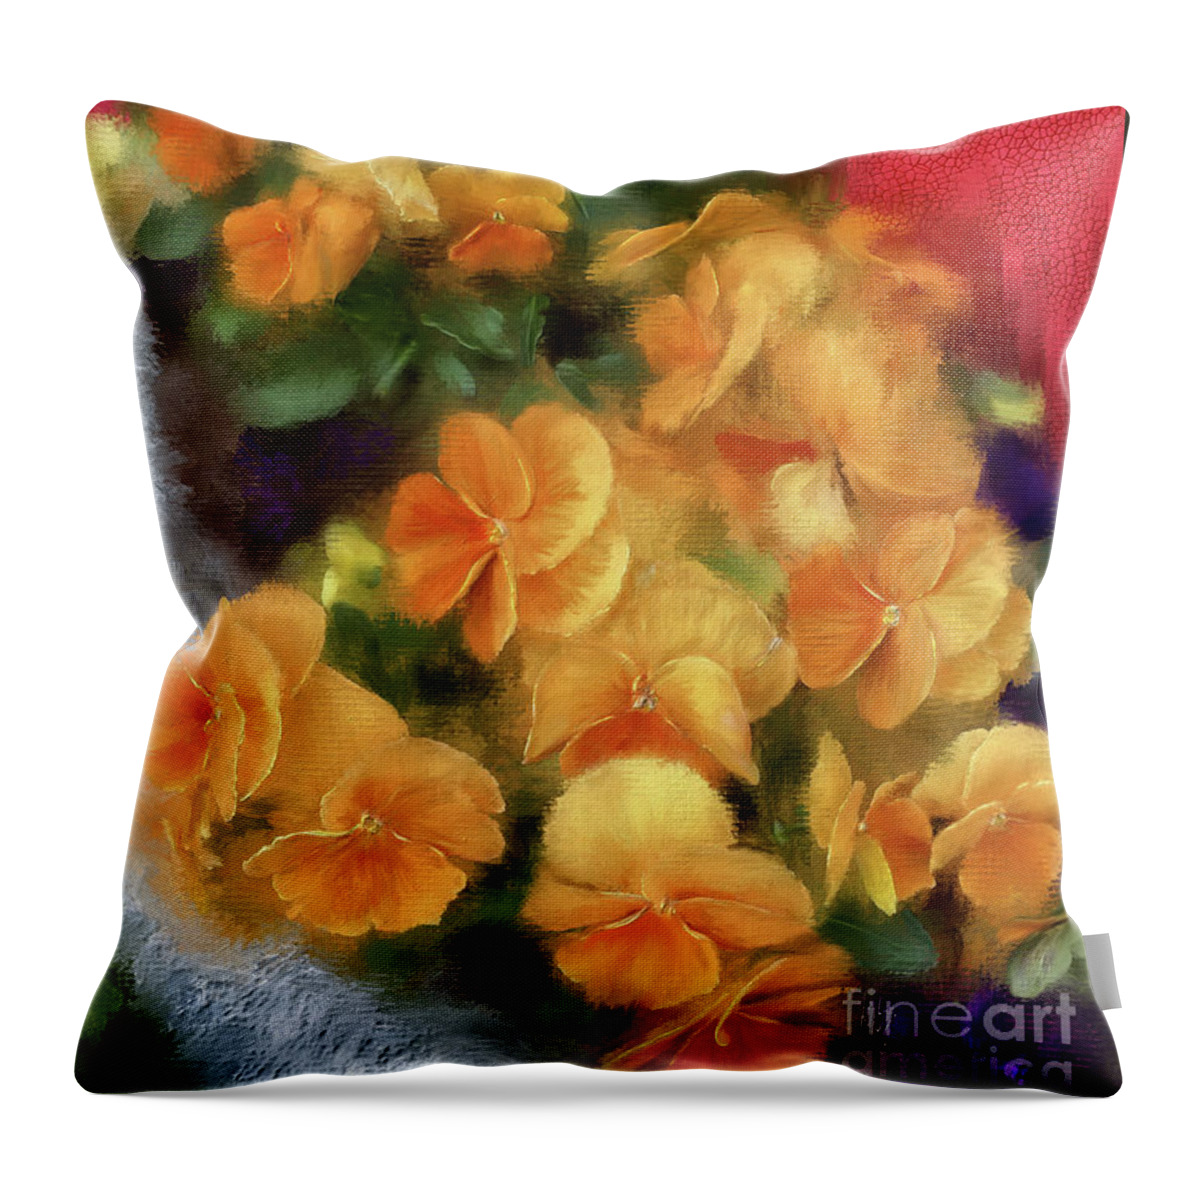 Pansies Throw Pillow featuring the digital art I Love Pansies by Lois Bryan